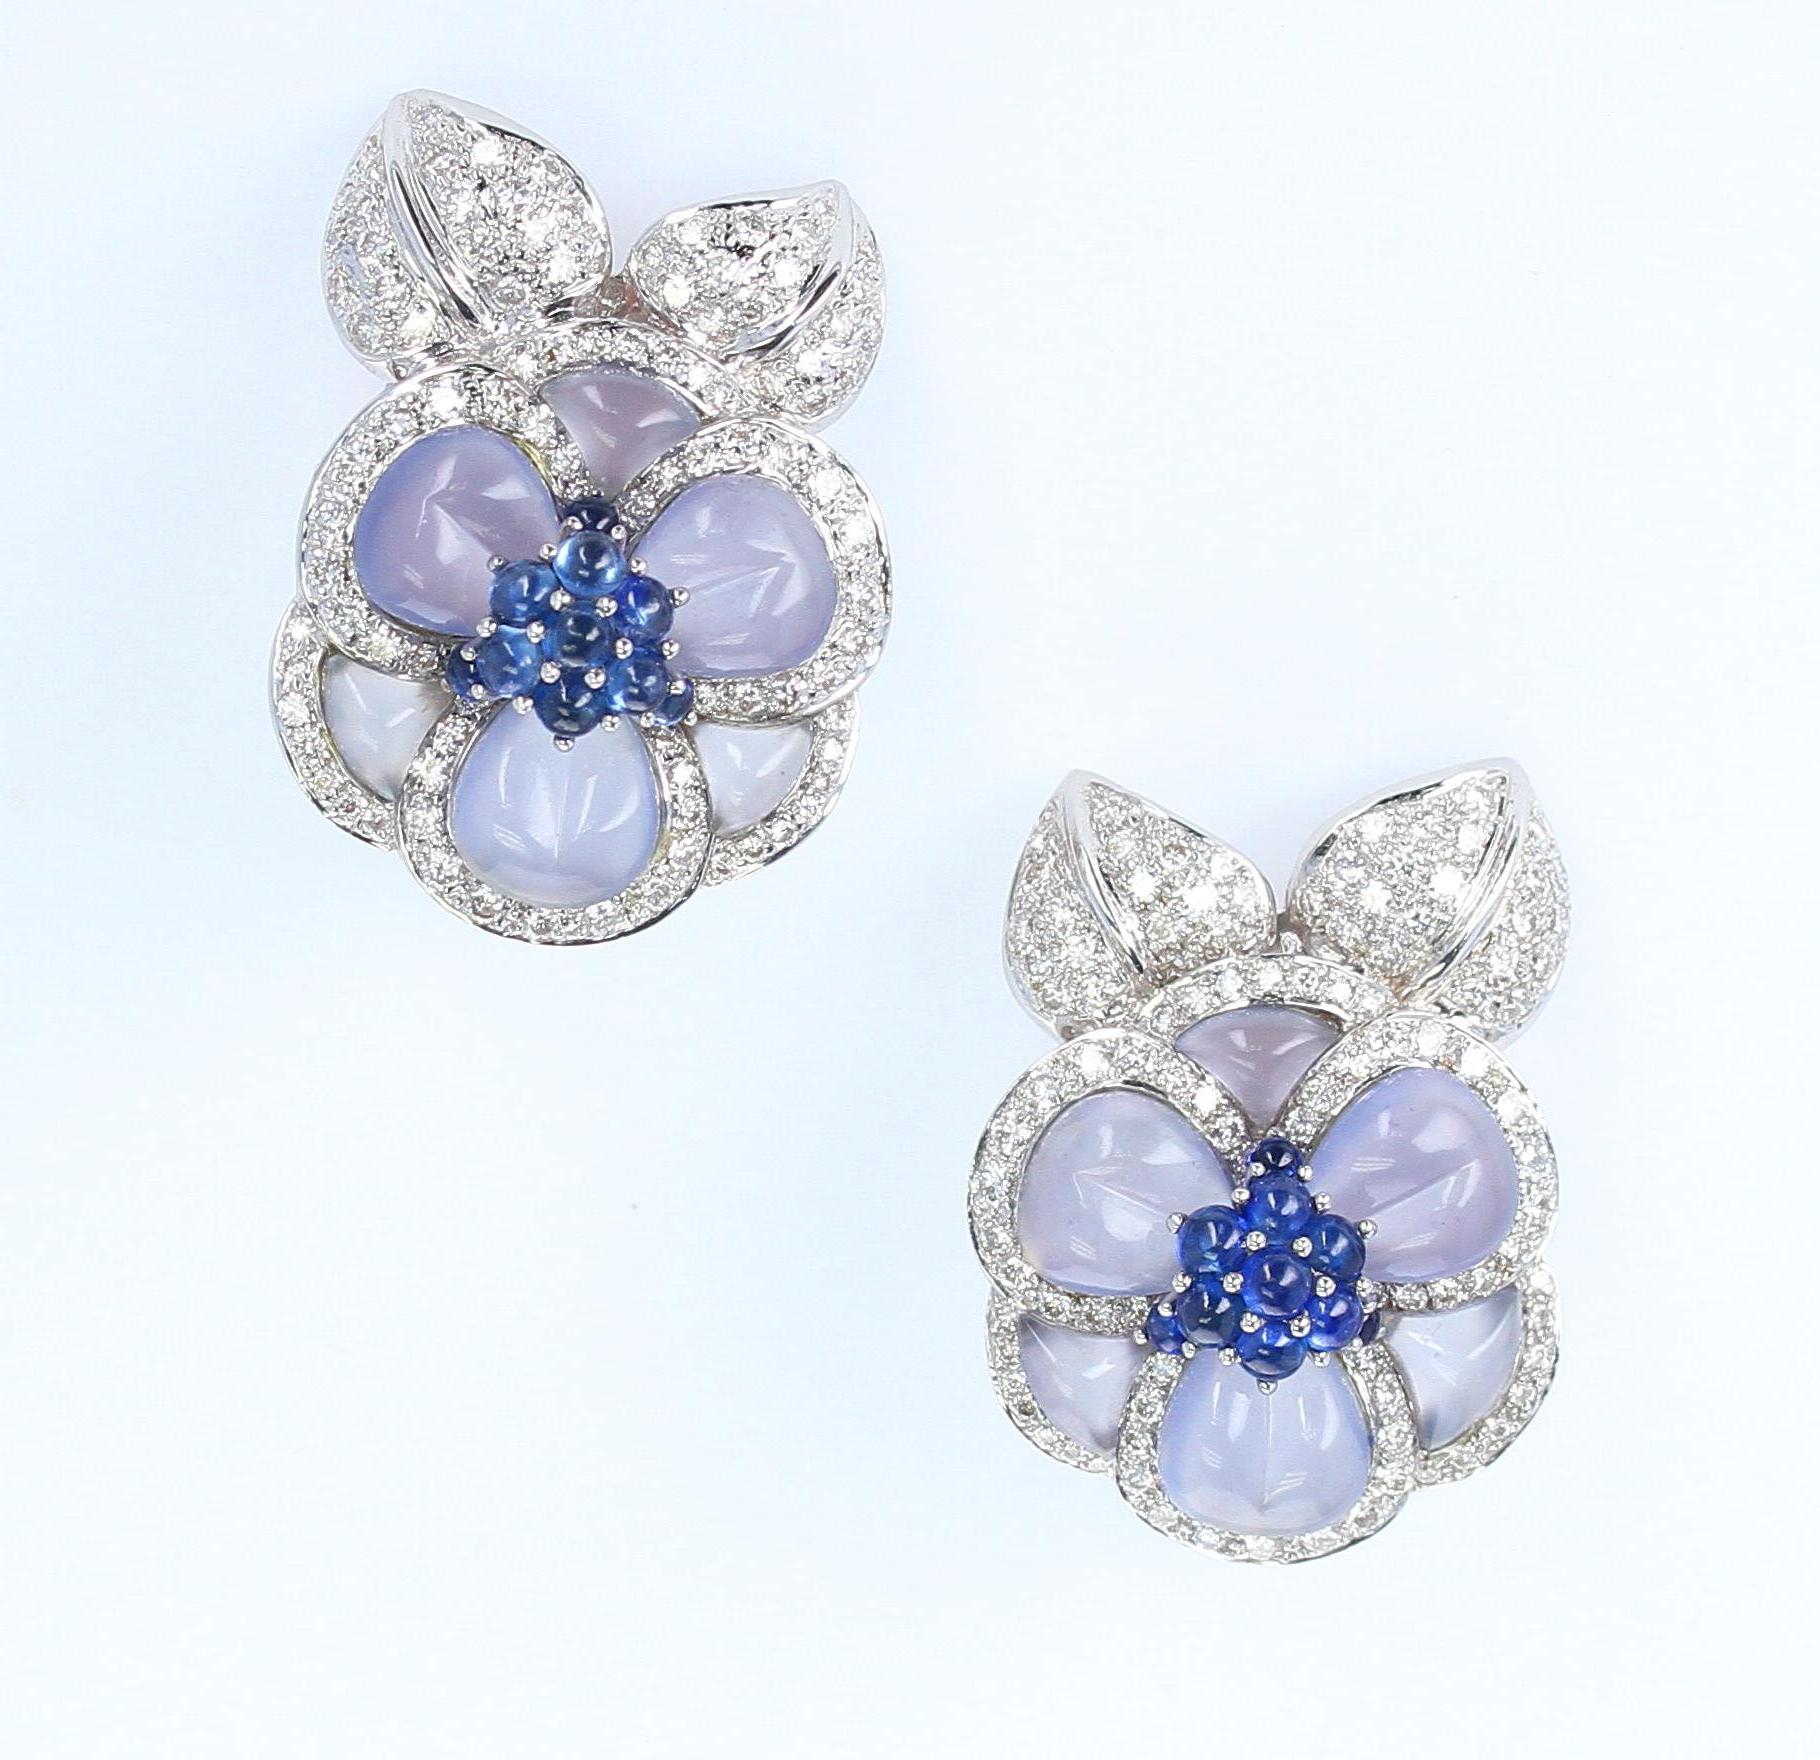 Round Cut Carved Chalcedony Floral Earrings with Diamonds and Sapphires, White Gold